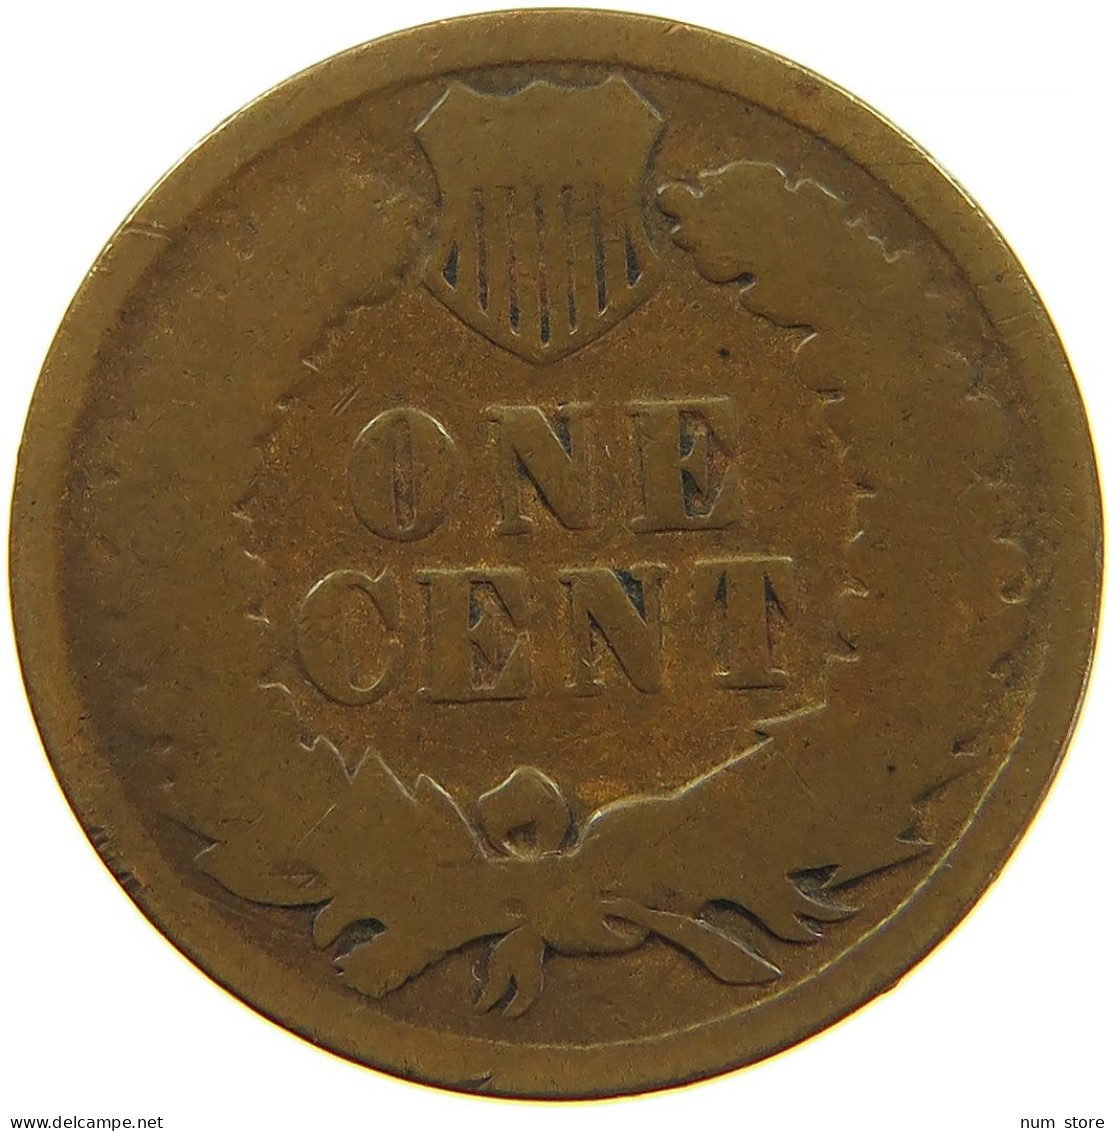 UNITED STATES OF AMERICA CENT 1888 INDIAN HEAD #s091 0361 - 1859-1909: Indian Head